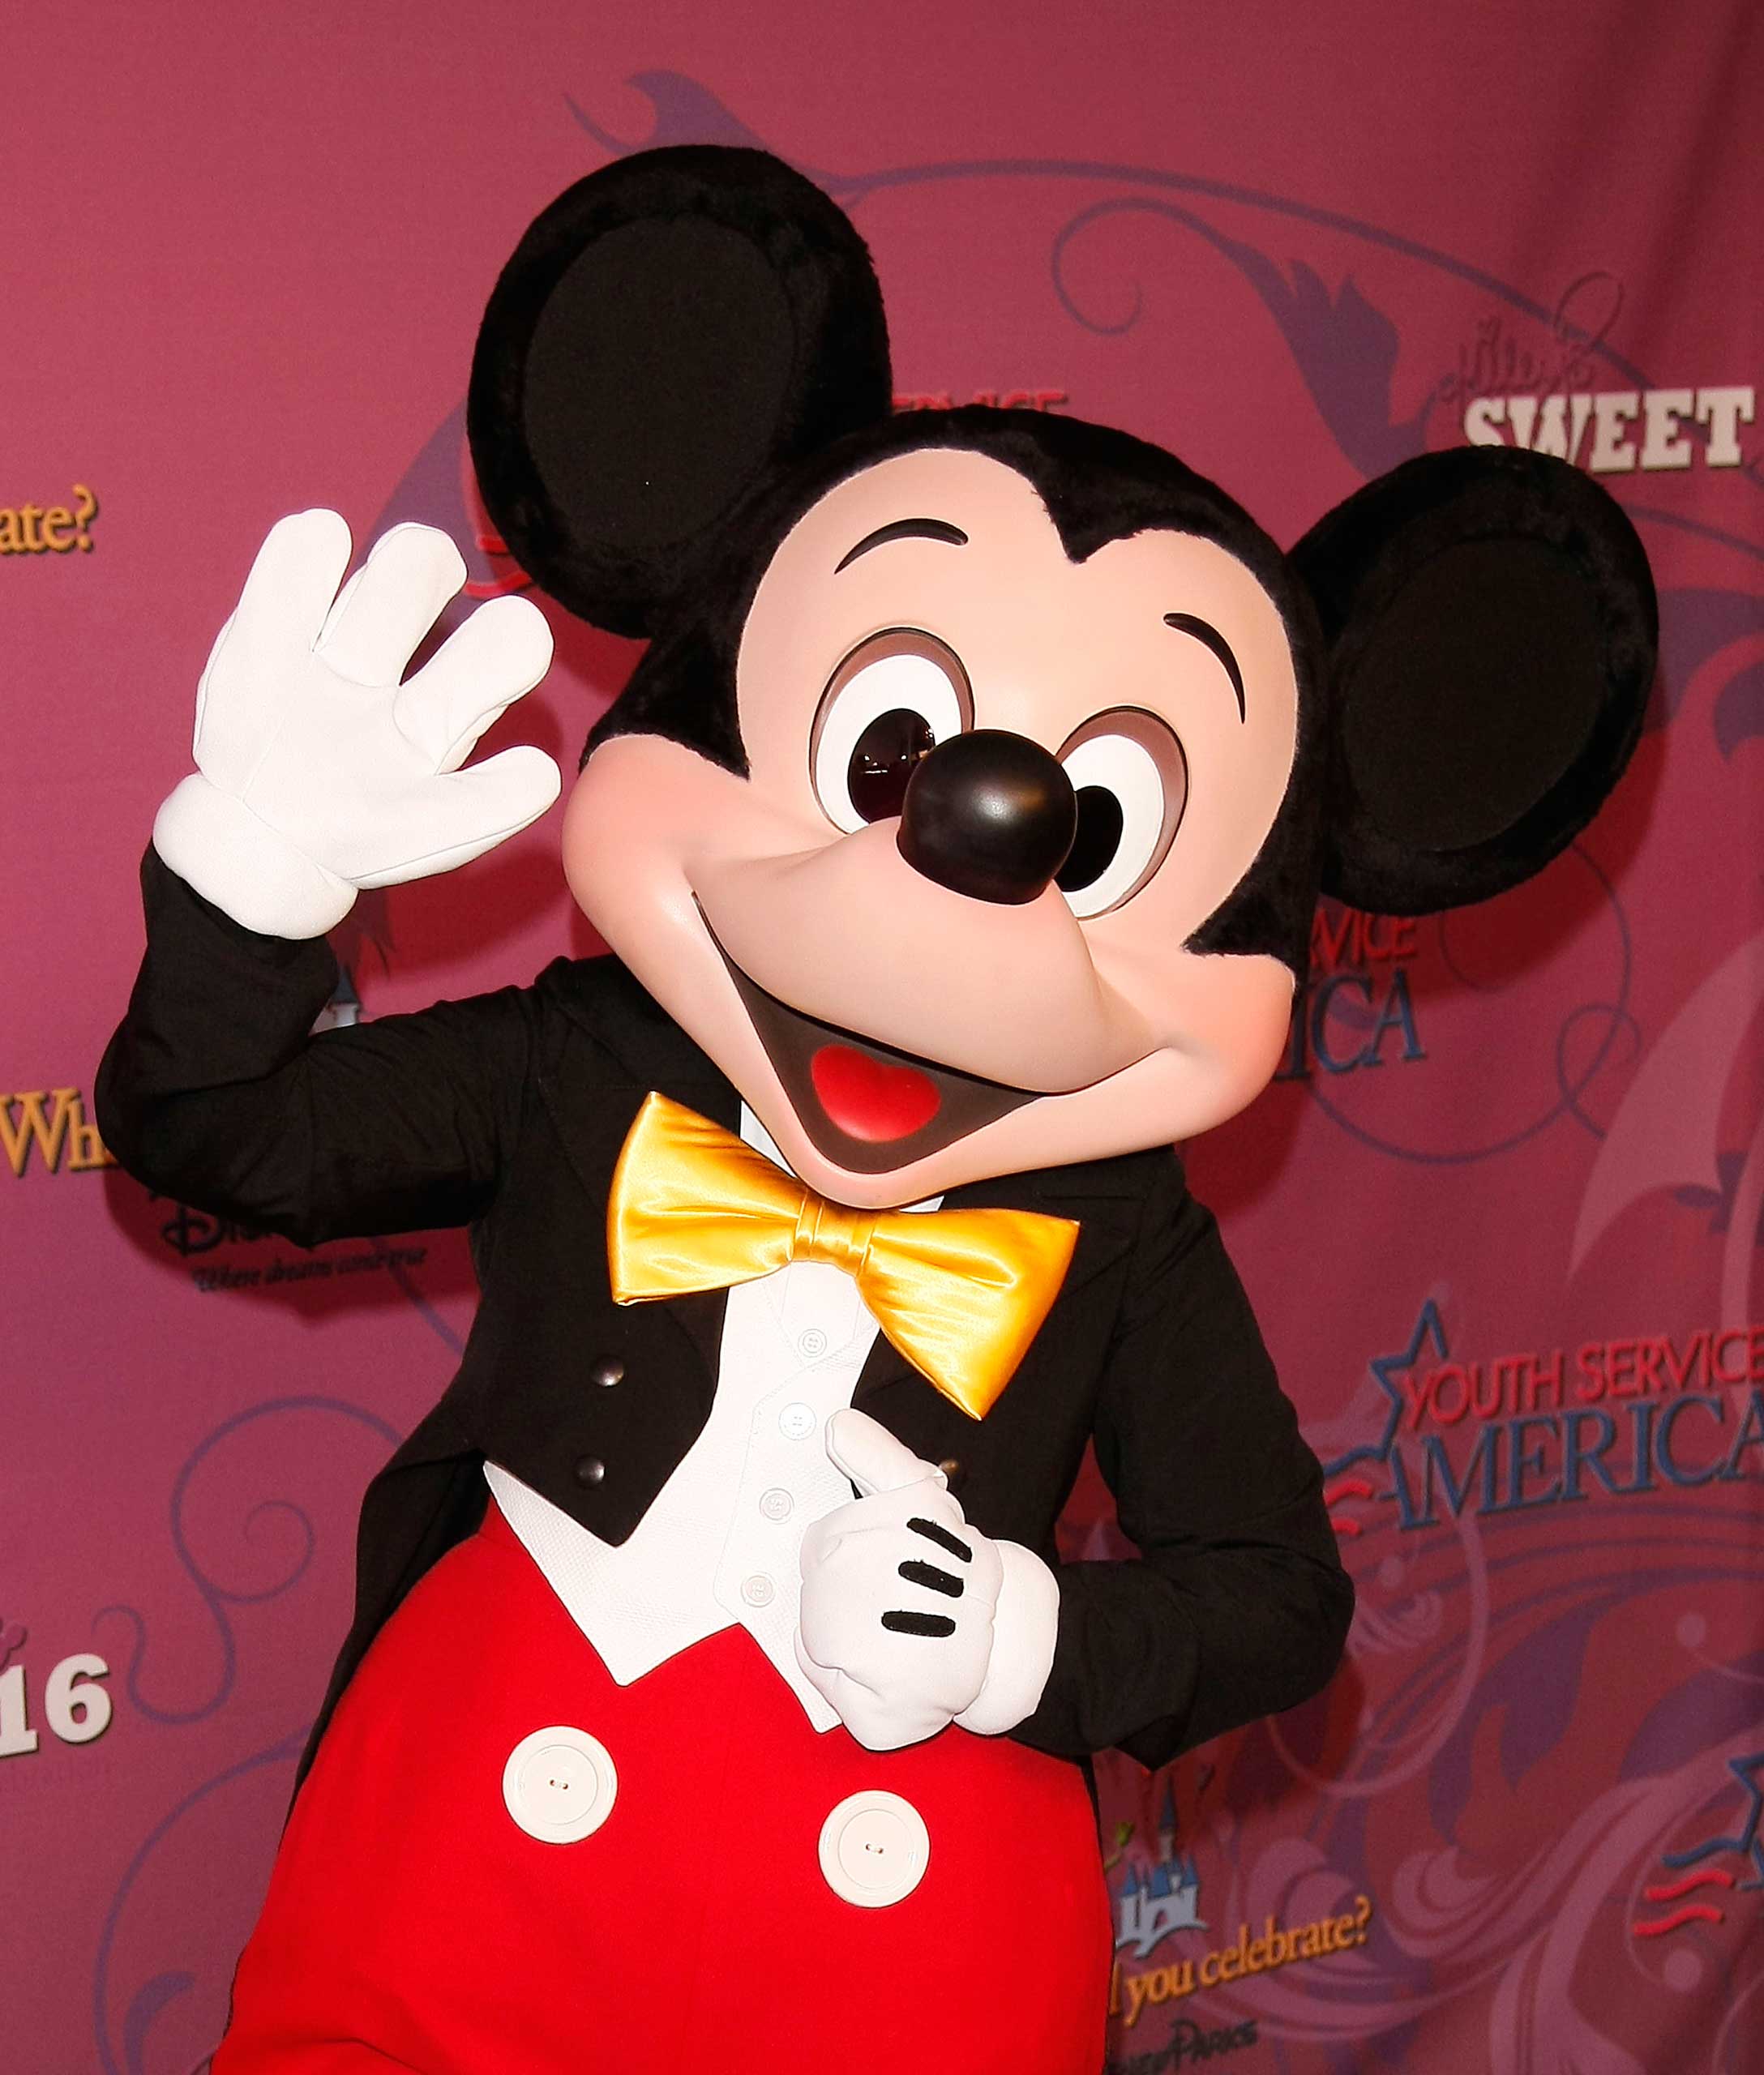 time-100-influential-animals-joel-stein_08-mickey-mouse